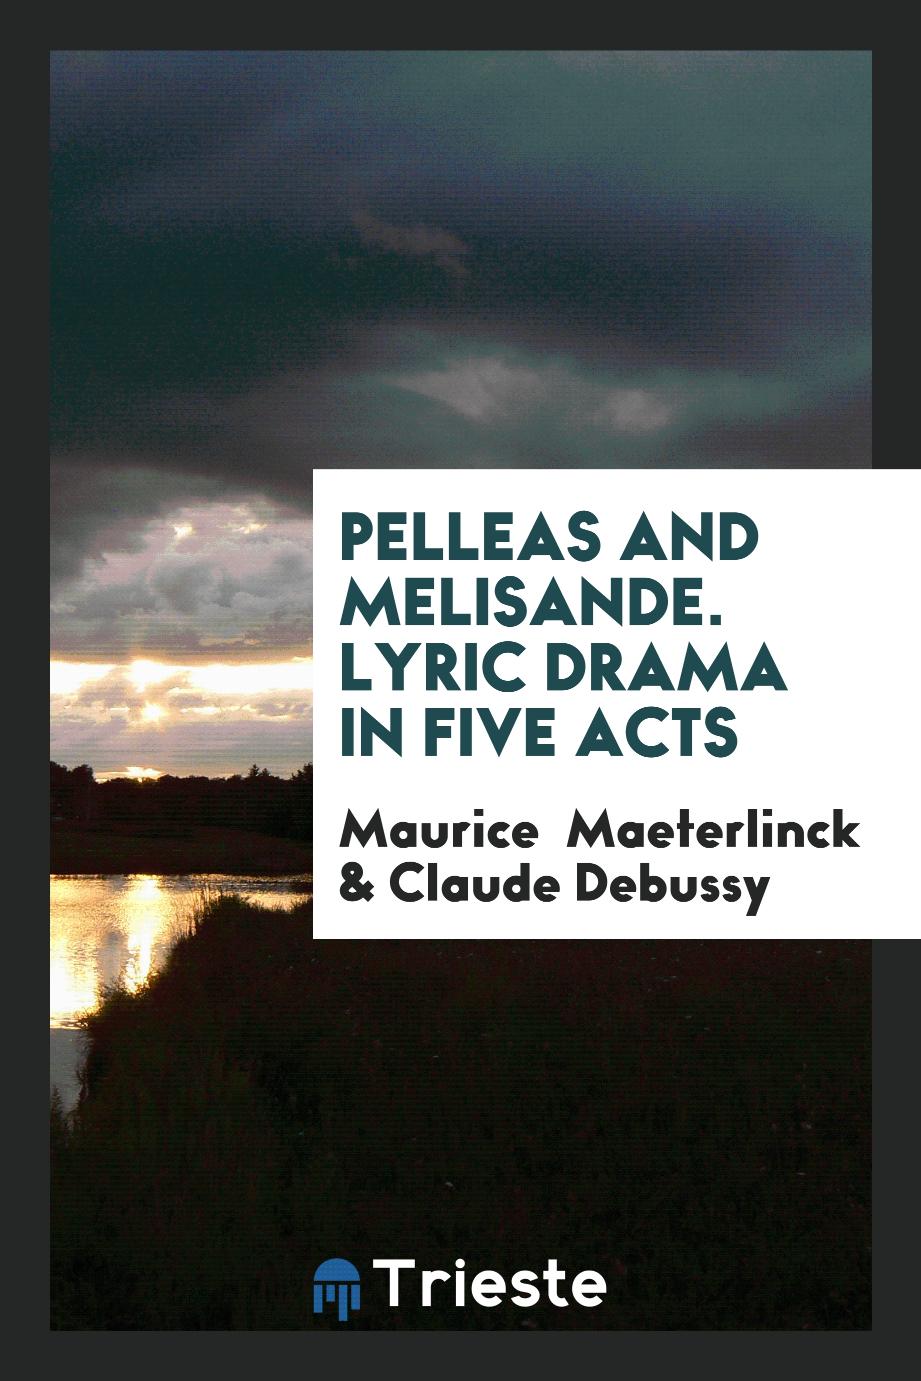 Pelleas and Melisande. Lyric drama in Five Acts